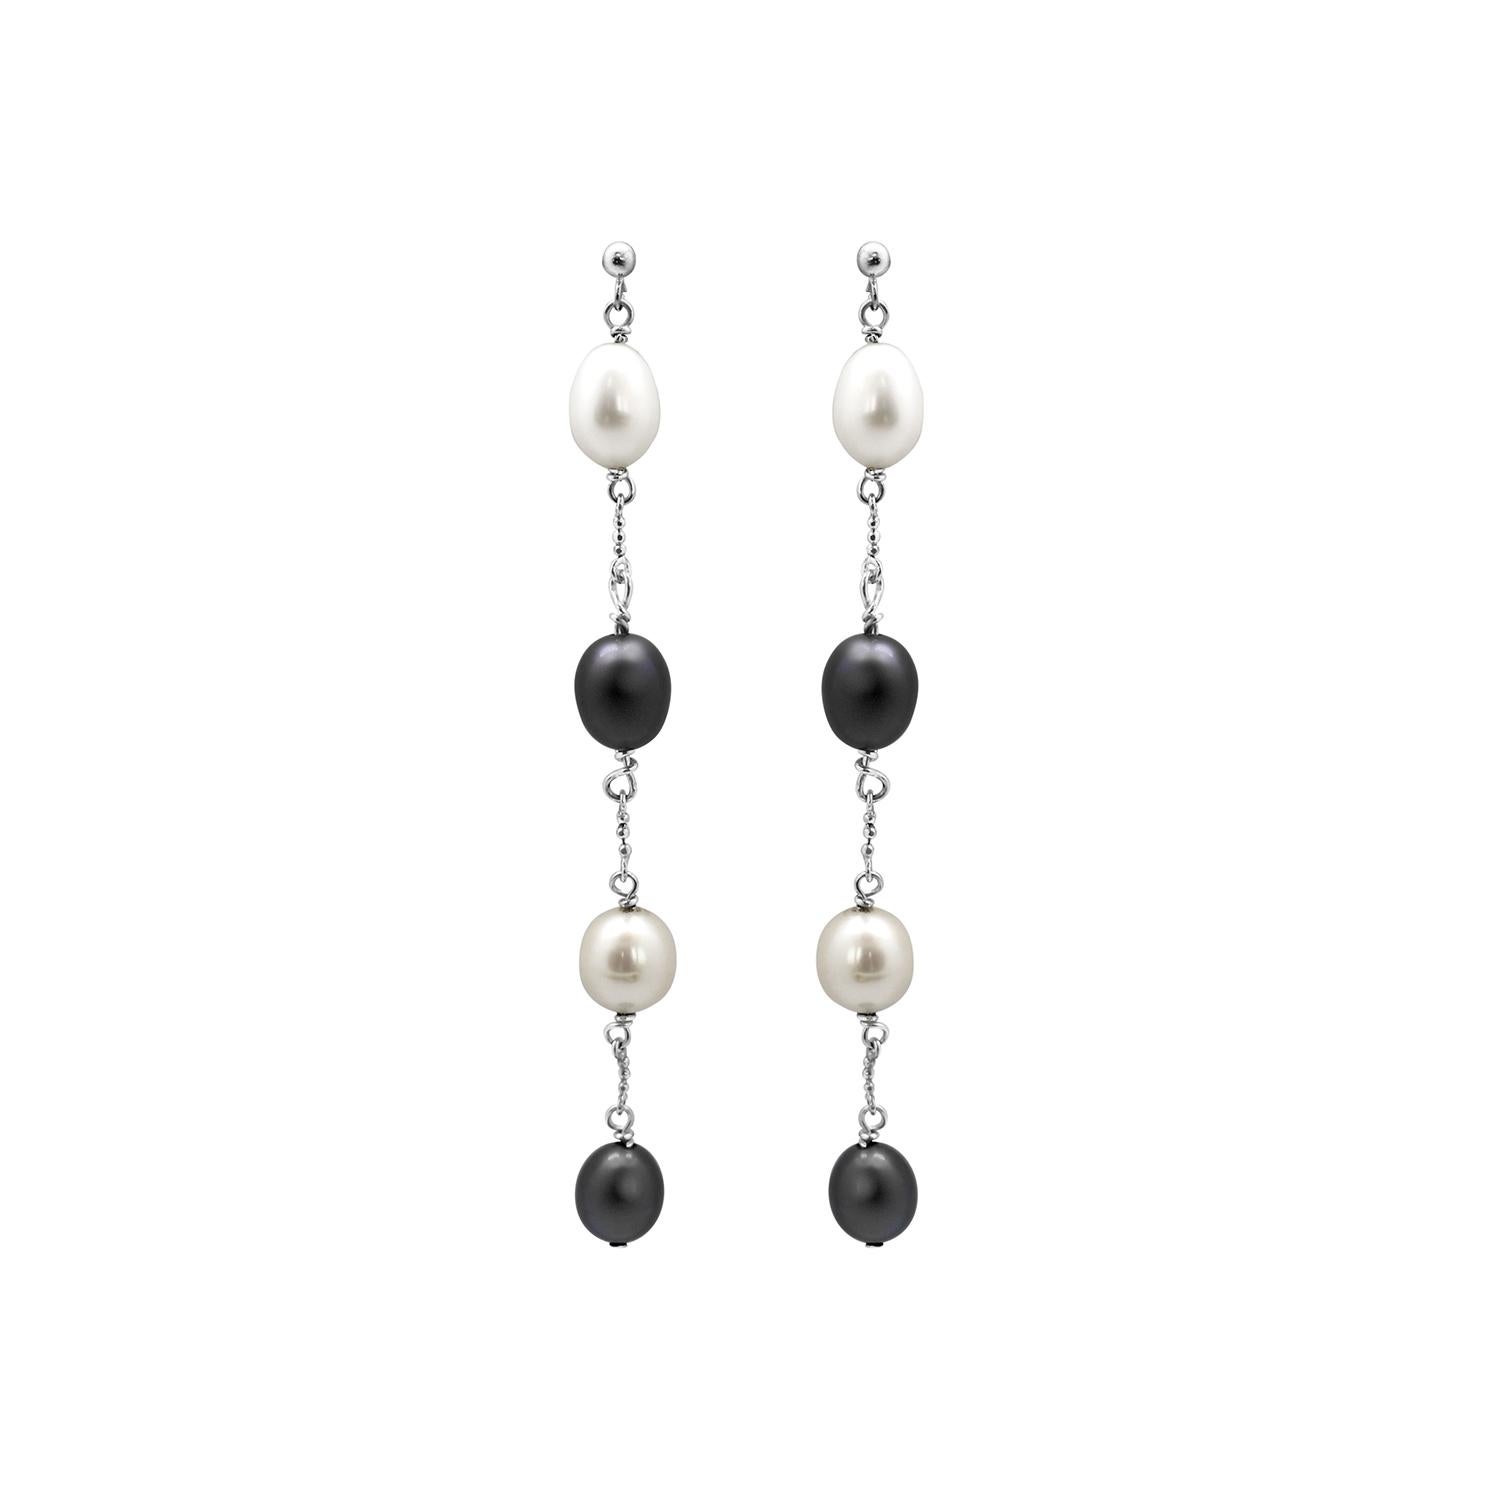 Timeless and alluring upcycled pearl drop earrings, both precious and sustainable. Floating on a  deliberately rough 18k recycled white gold chain, sleek freshwater pearls are retaining luminescence in their oval profiles. Handcrafted in London.